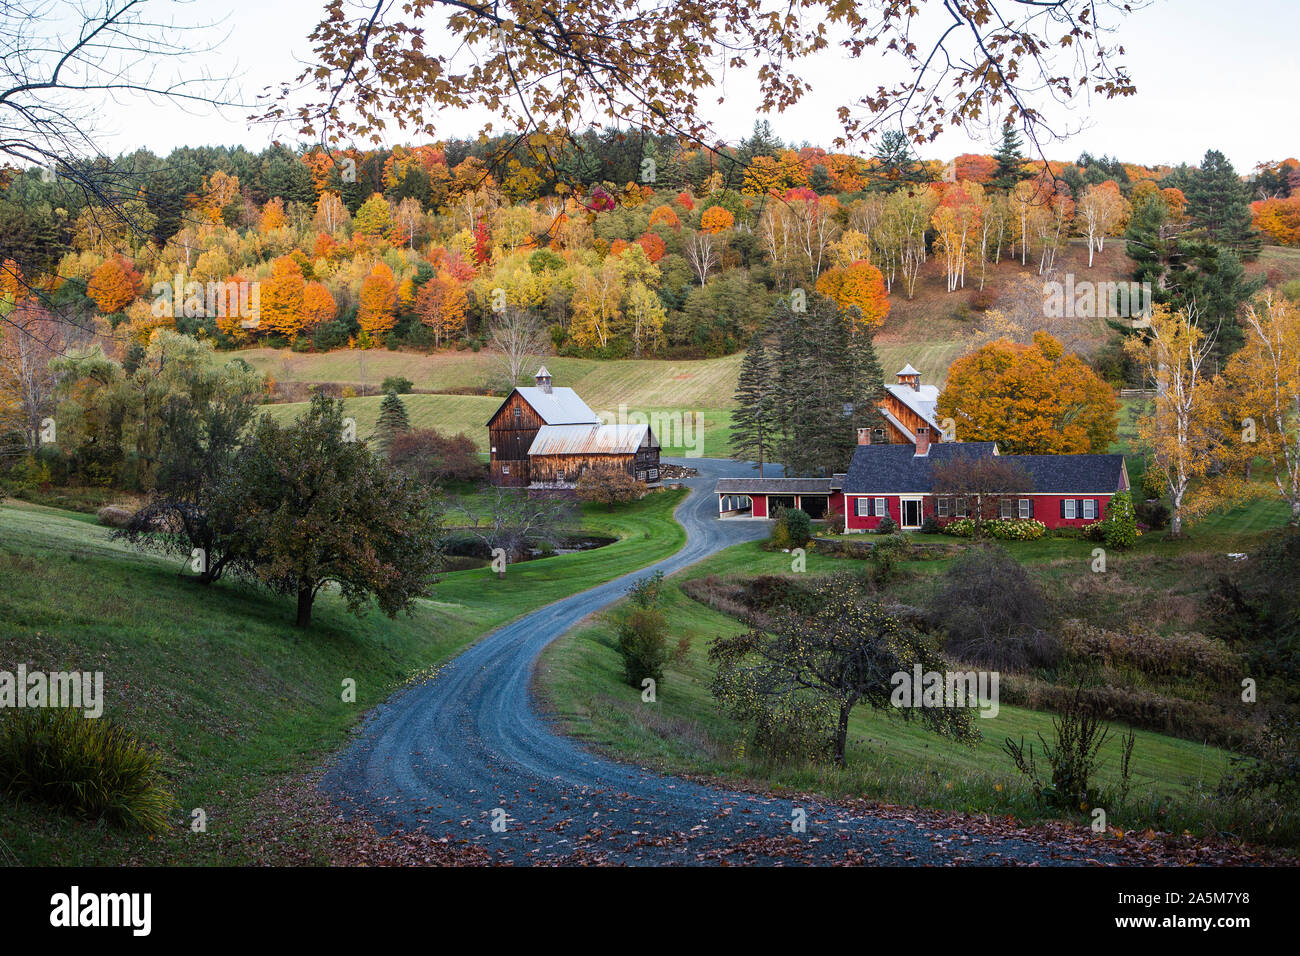 Fall scenery and foliage at Vermont's famous Sleepy Hollow Farm. Stock Photo